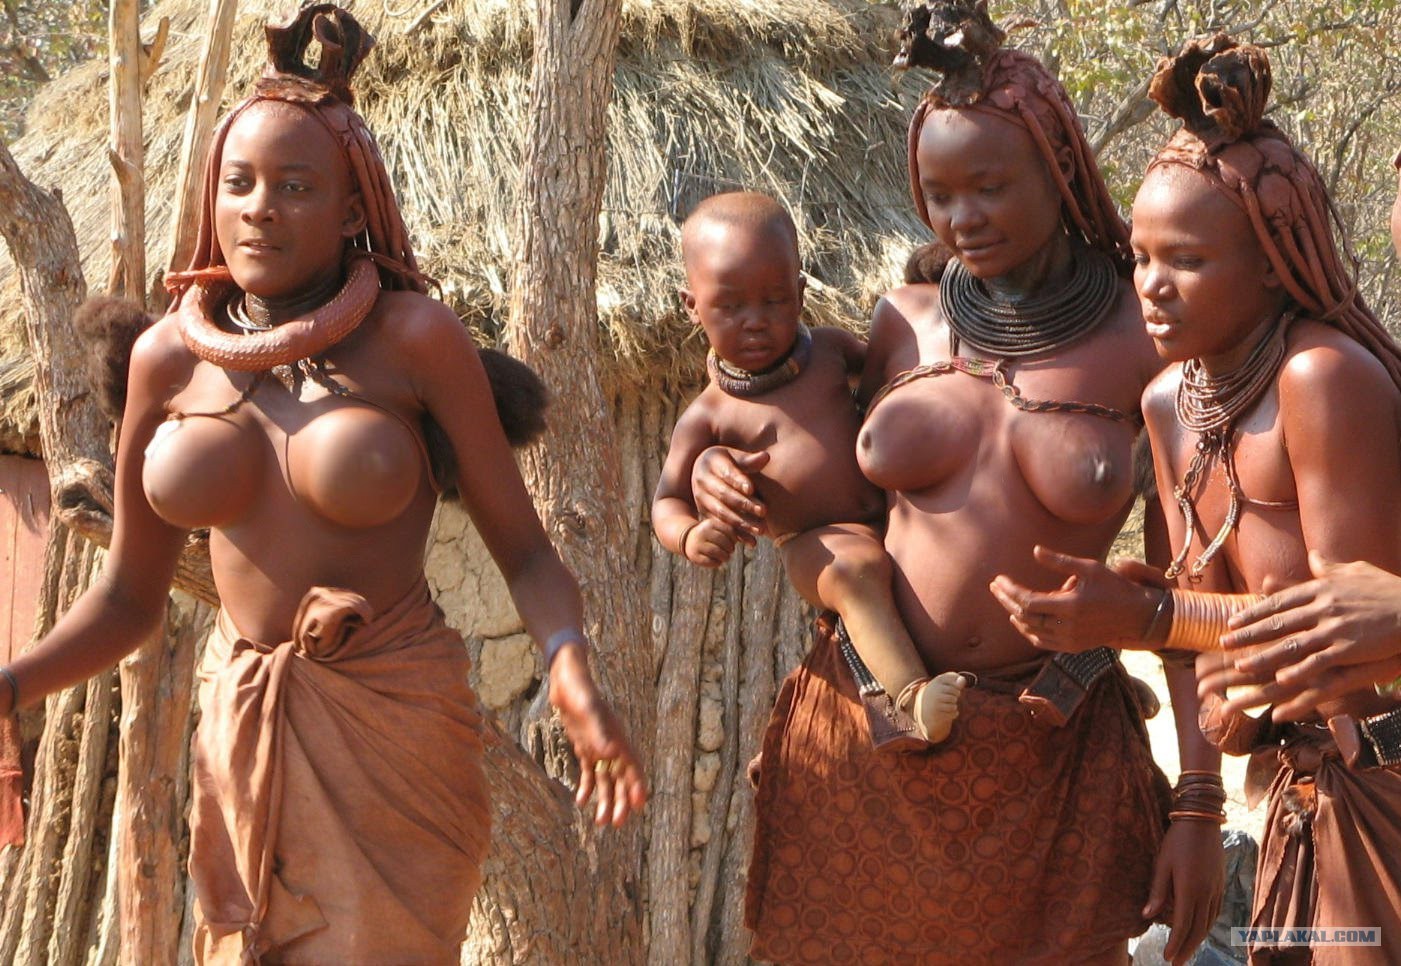 Big Breast African Tribe - African Women's Boobs (50 photos) - porn photo